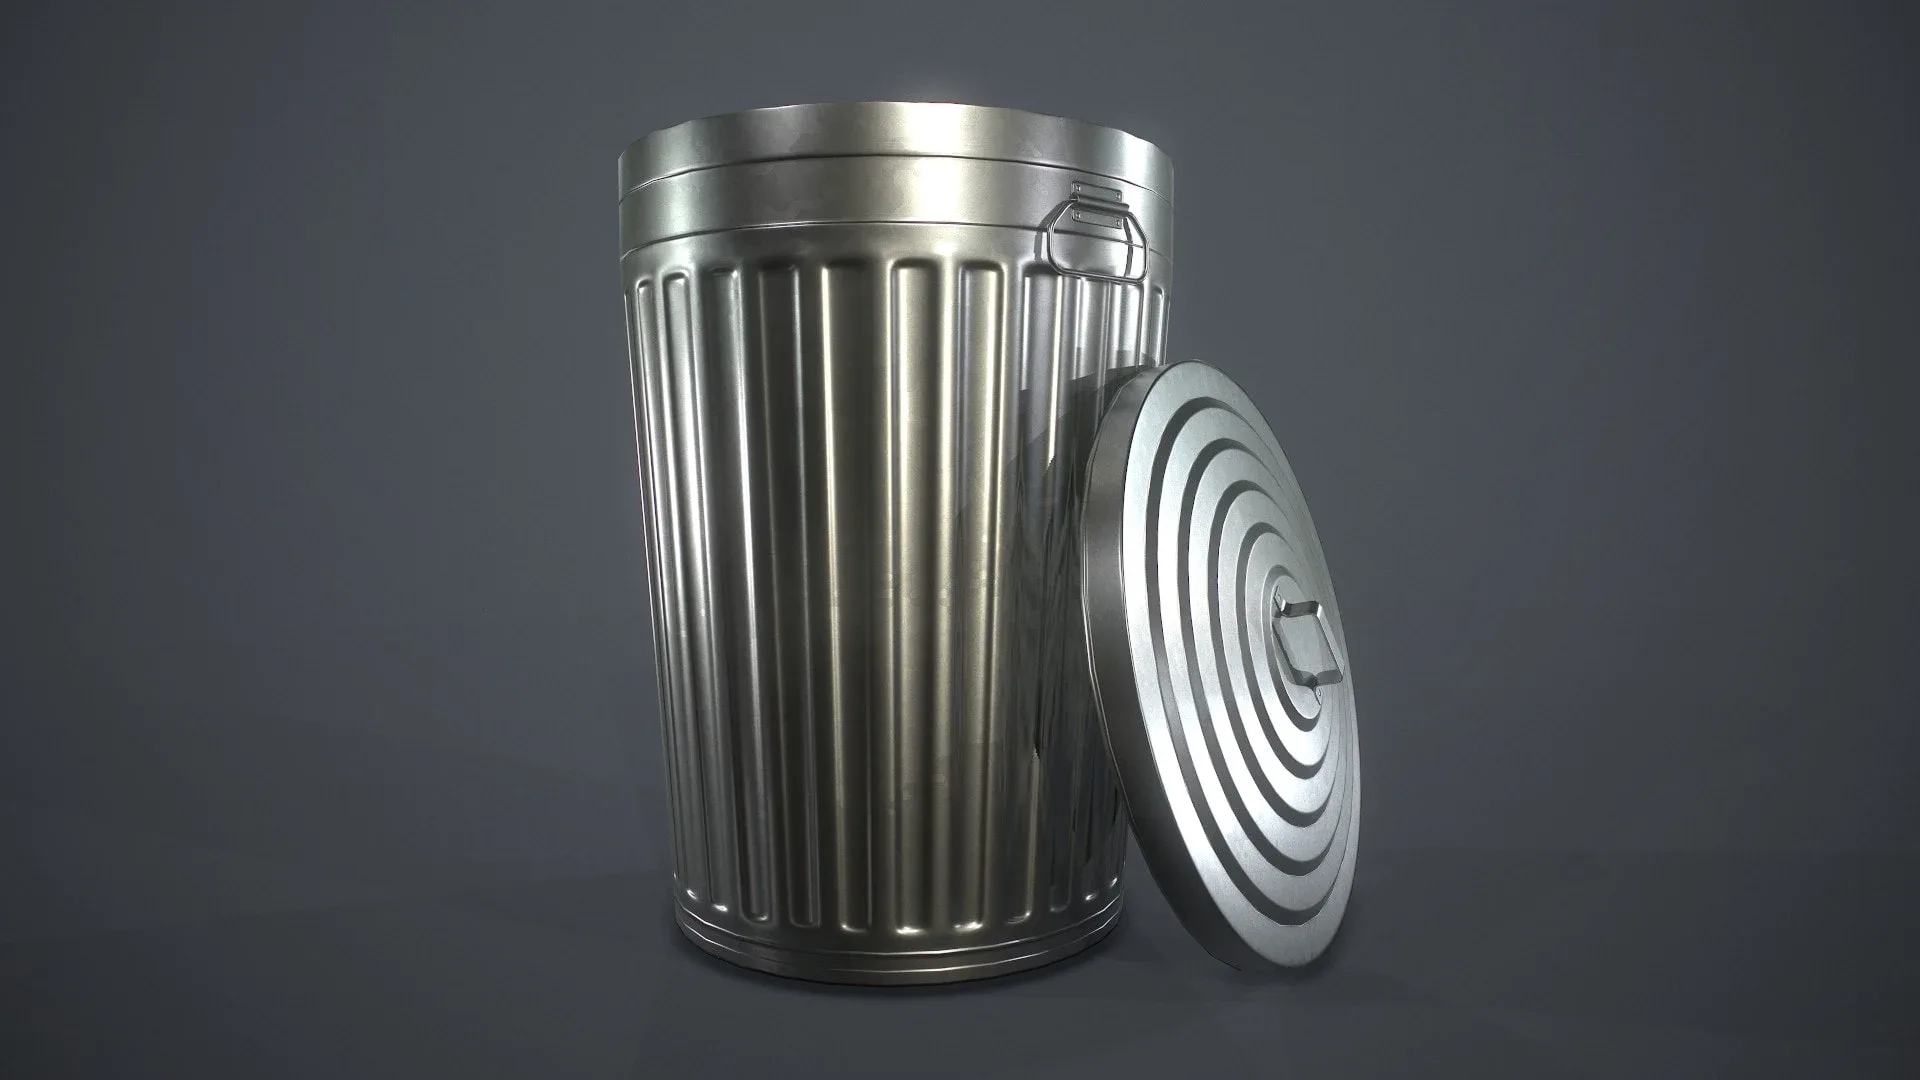 Metal Trash Can with Garbage Bags - Low Poly